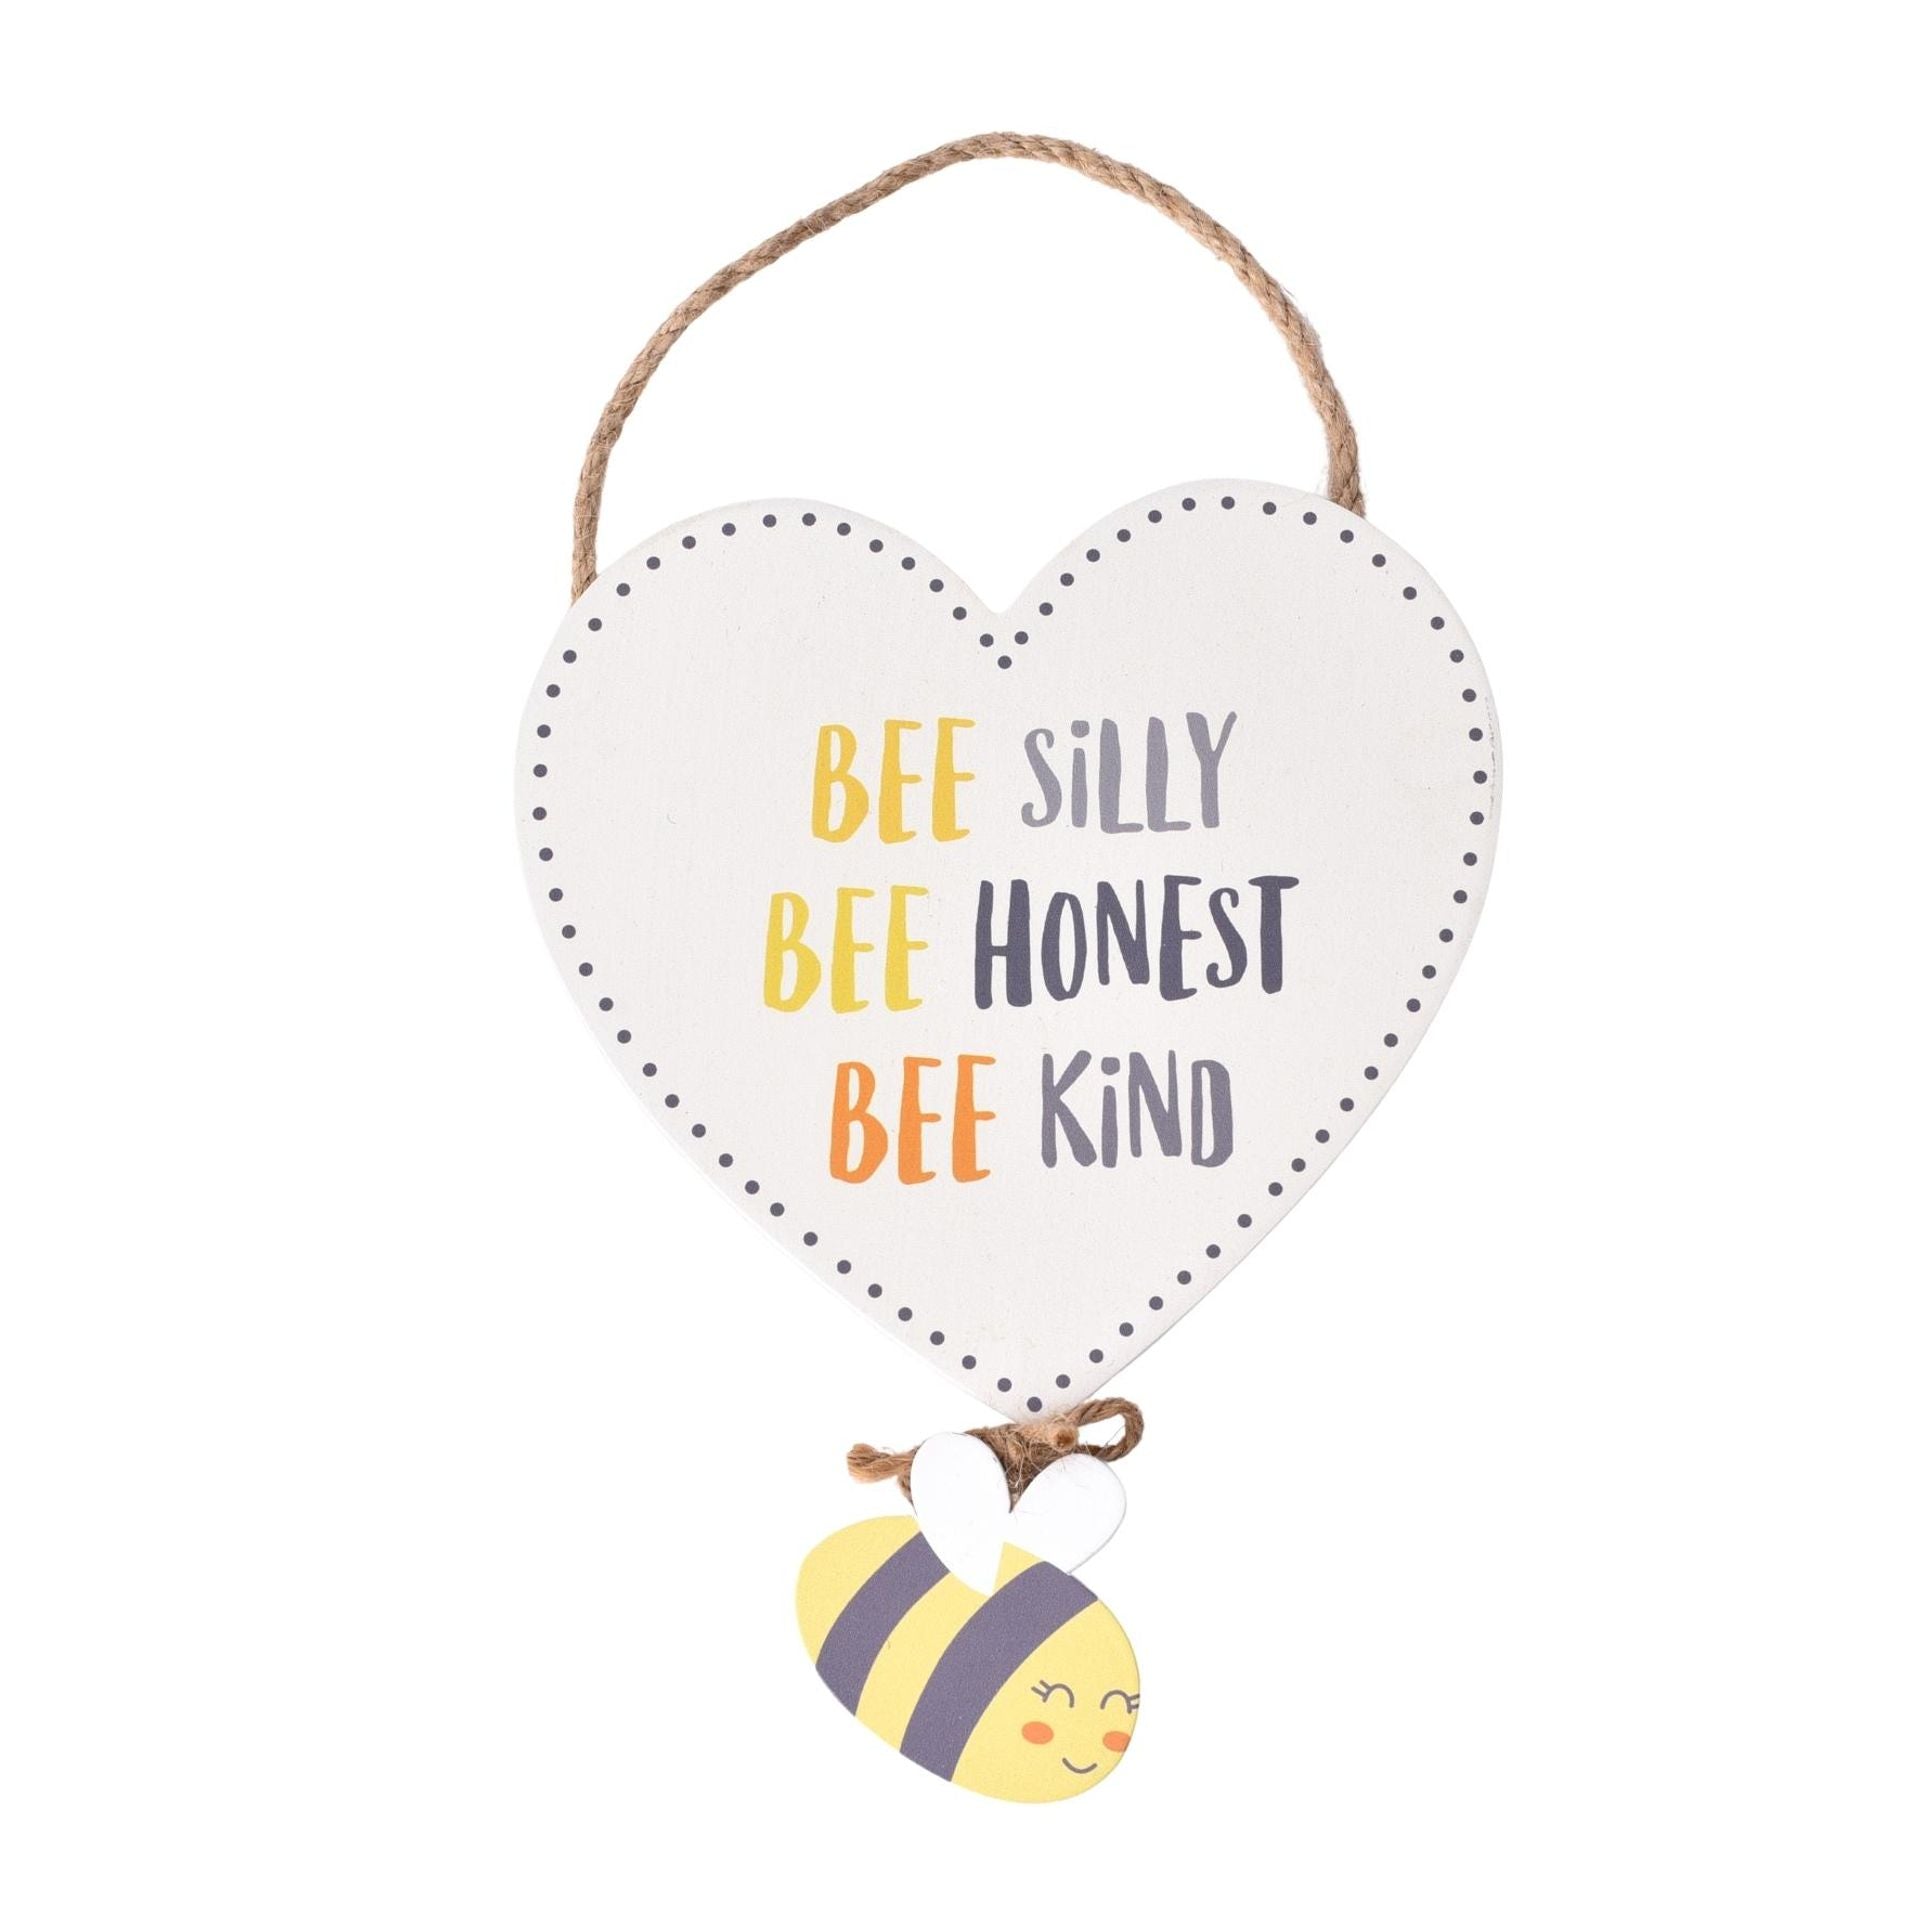 Love Life Heart Plaque - Bee Silly Honest Kind